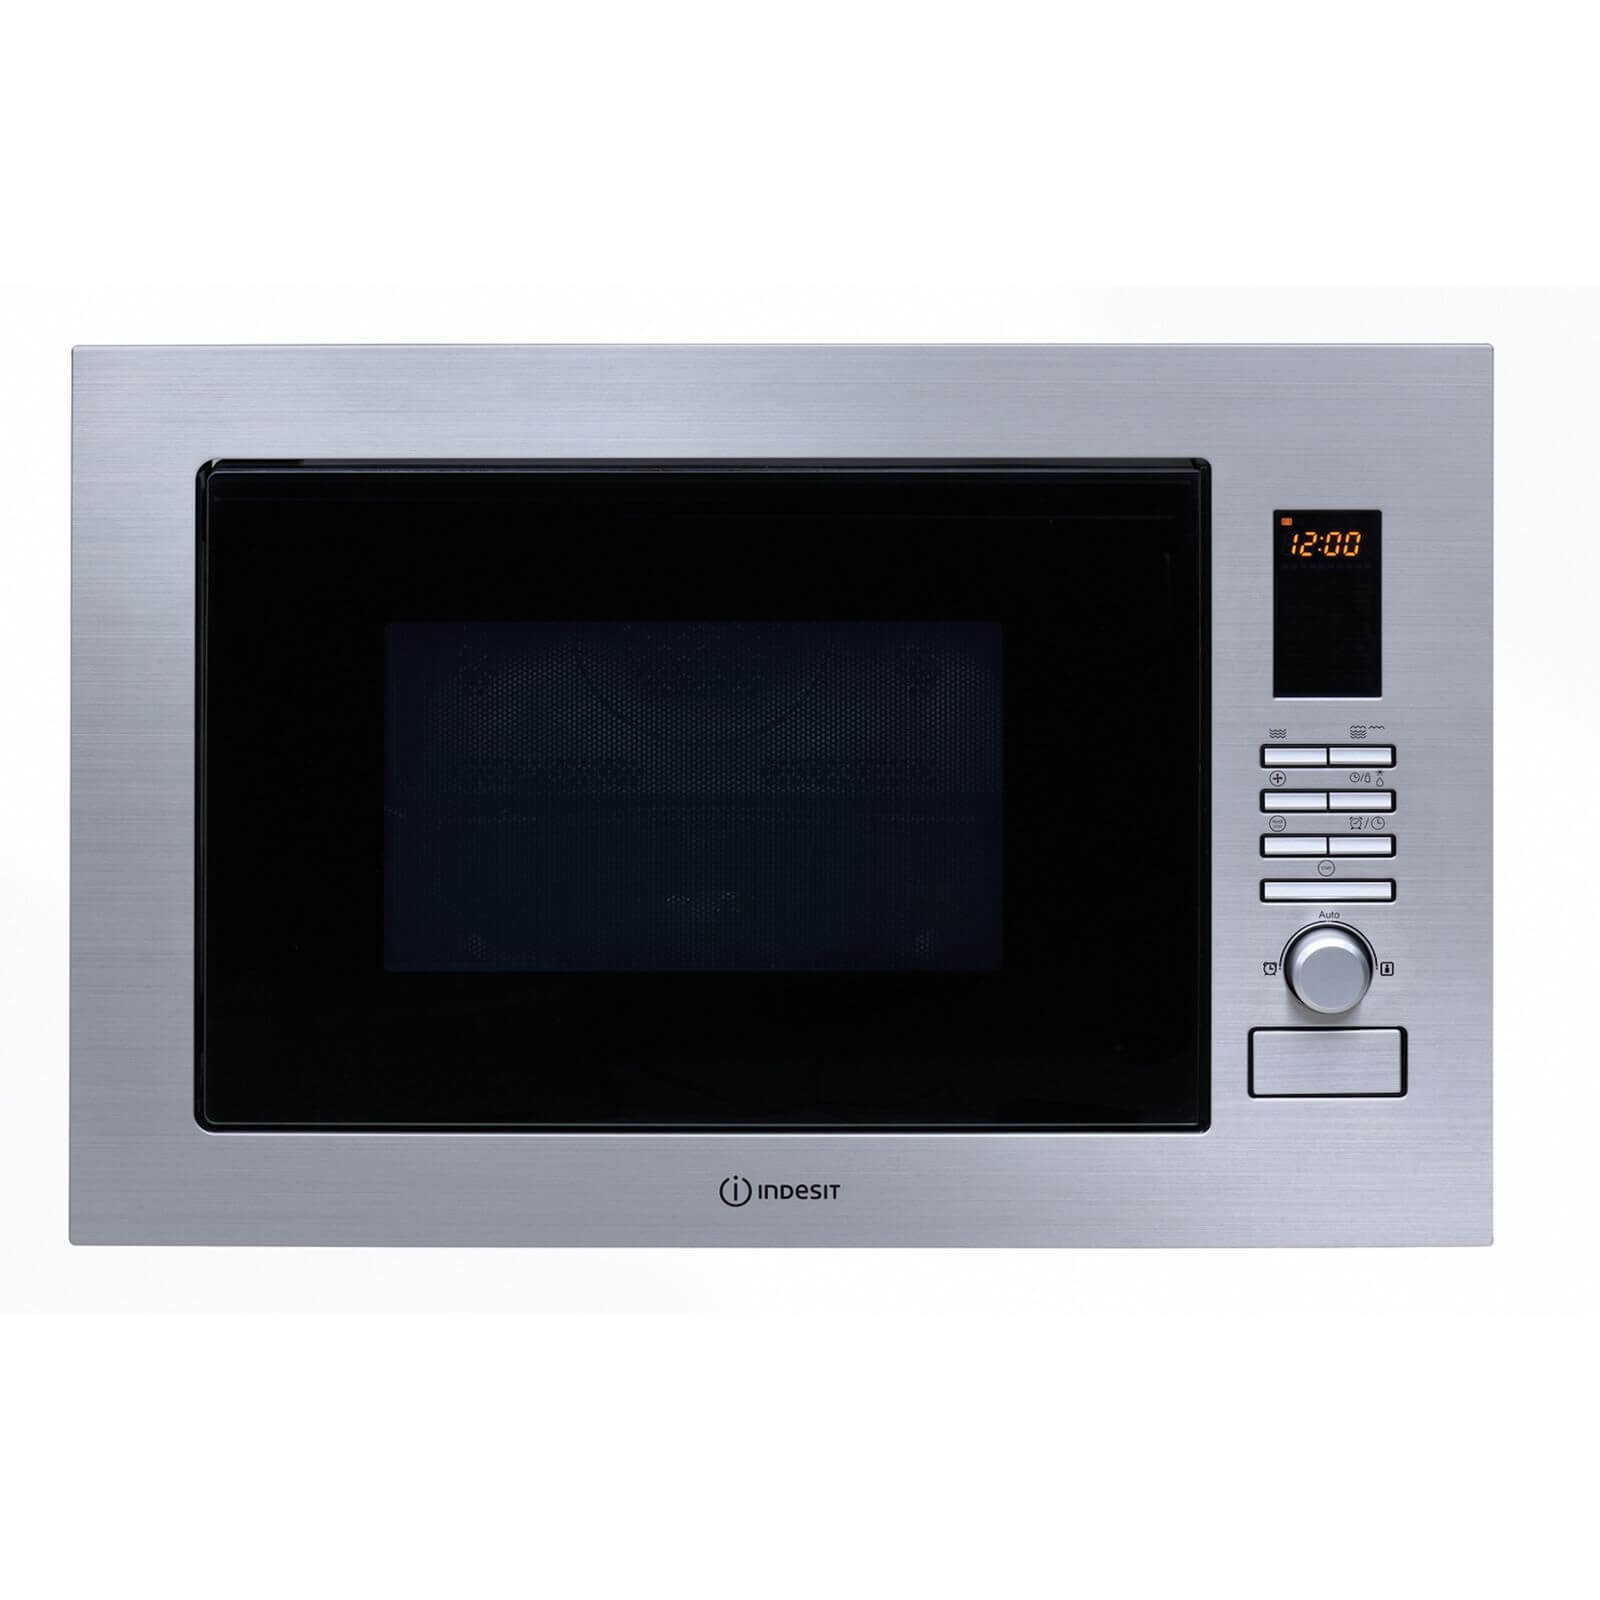 Indesit MWI222.2X UK Built-in Combination Microwave - Stainless Steel